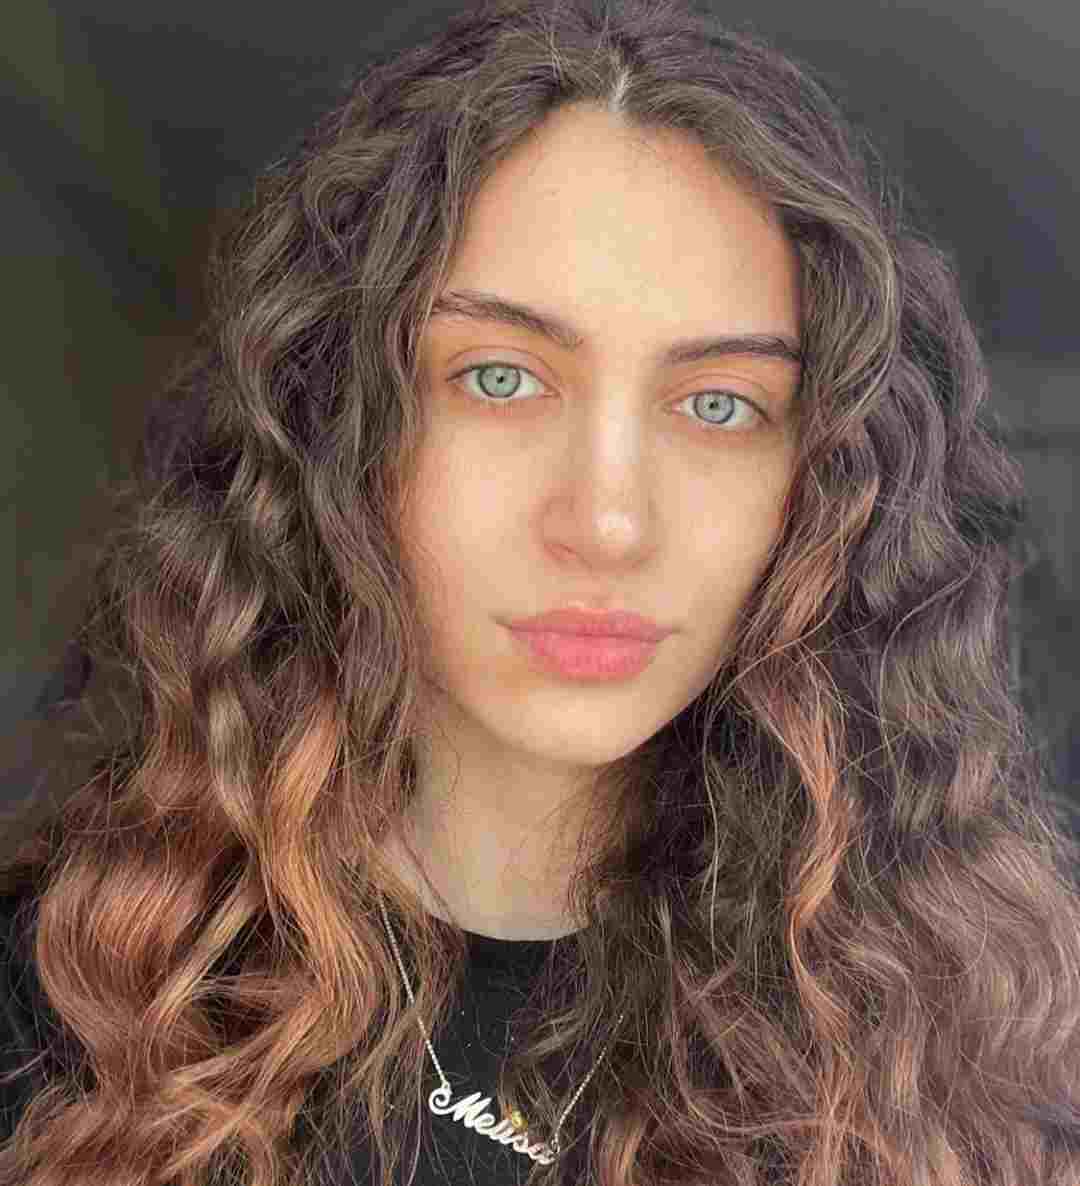 Melisa Raouf Net Worth, Age, Family, Boyfriend, Biography, and More